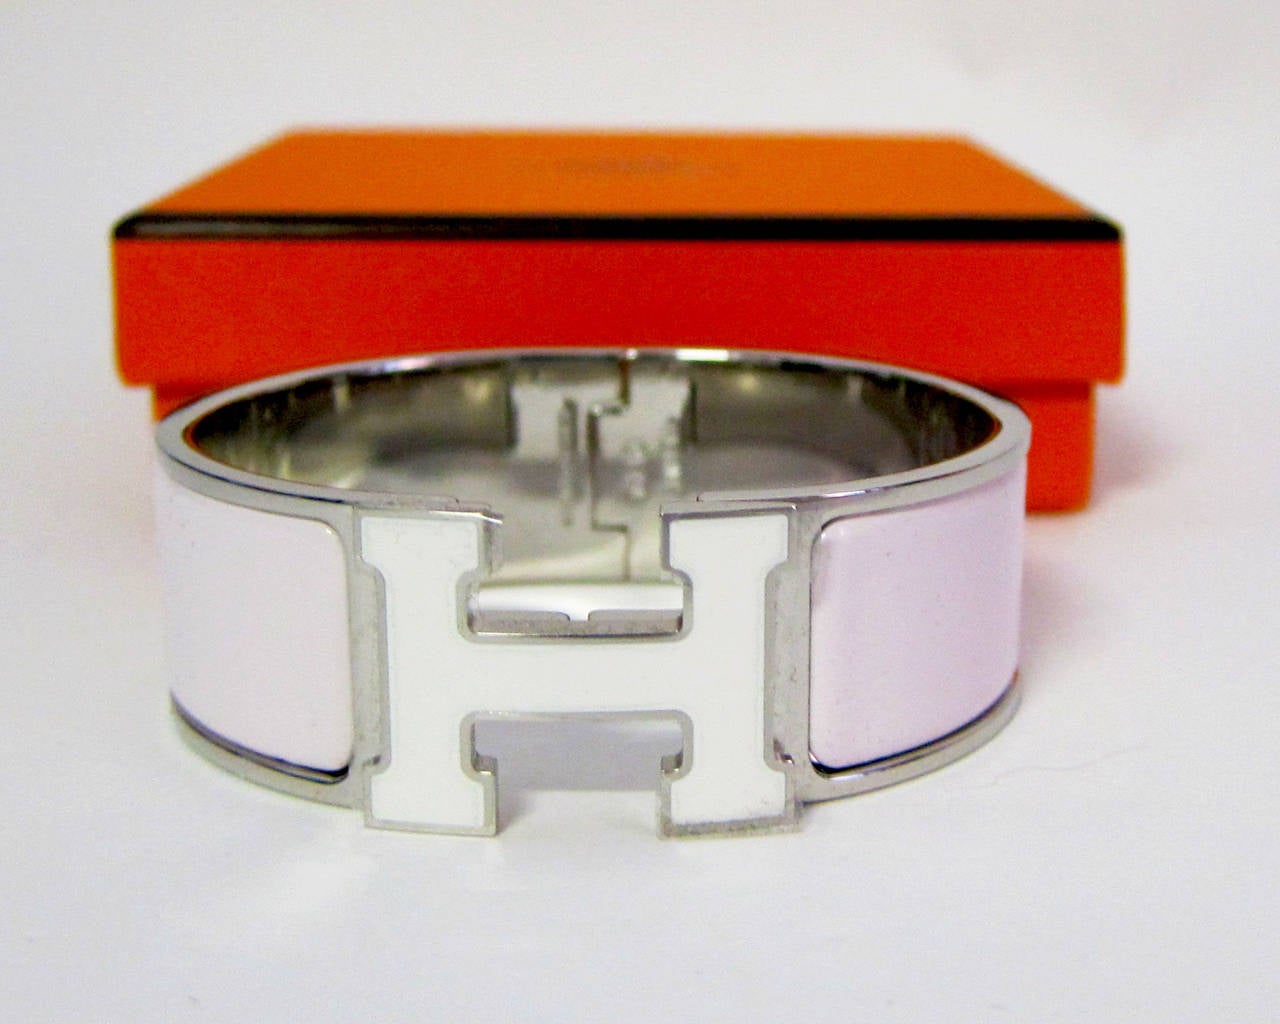 Hermes Rose Nymph White Lacquer Enamel H Clic Clac Bracelet Bangle

Brand new in box.  Absolutely store fresh!  
Size PM.  Model Wide.  Palladium plated hardware
2.25